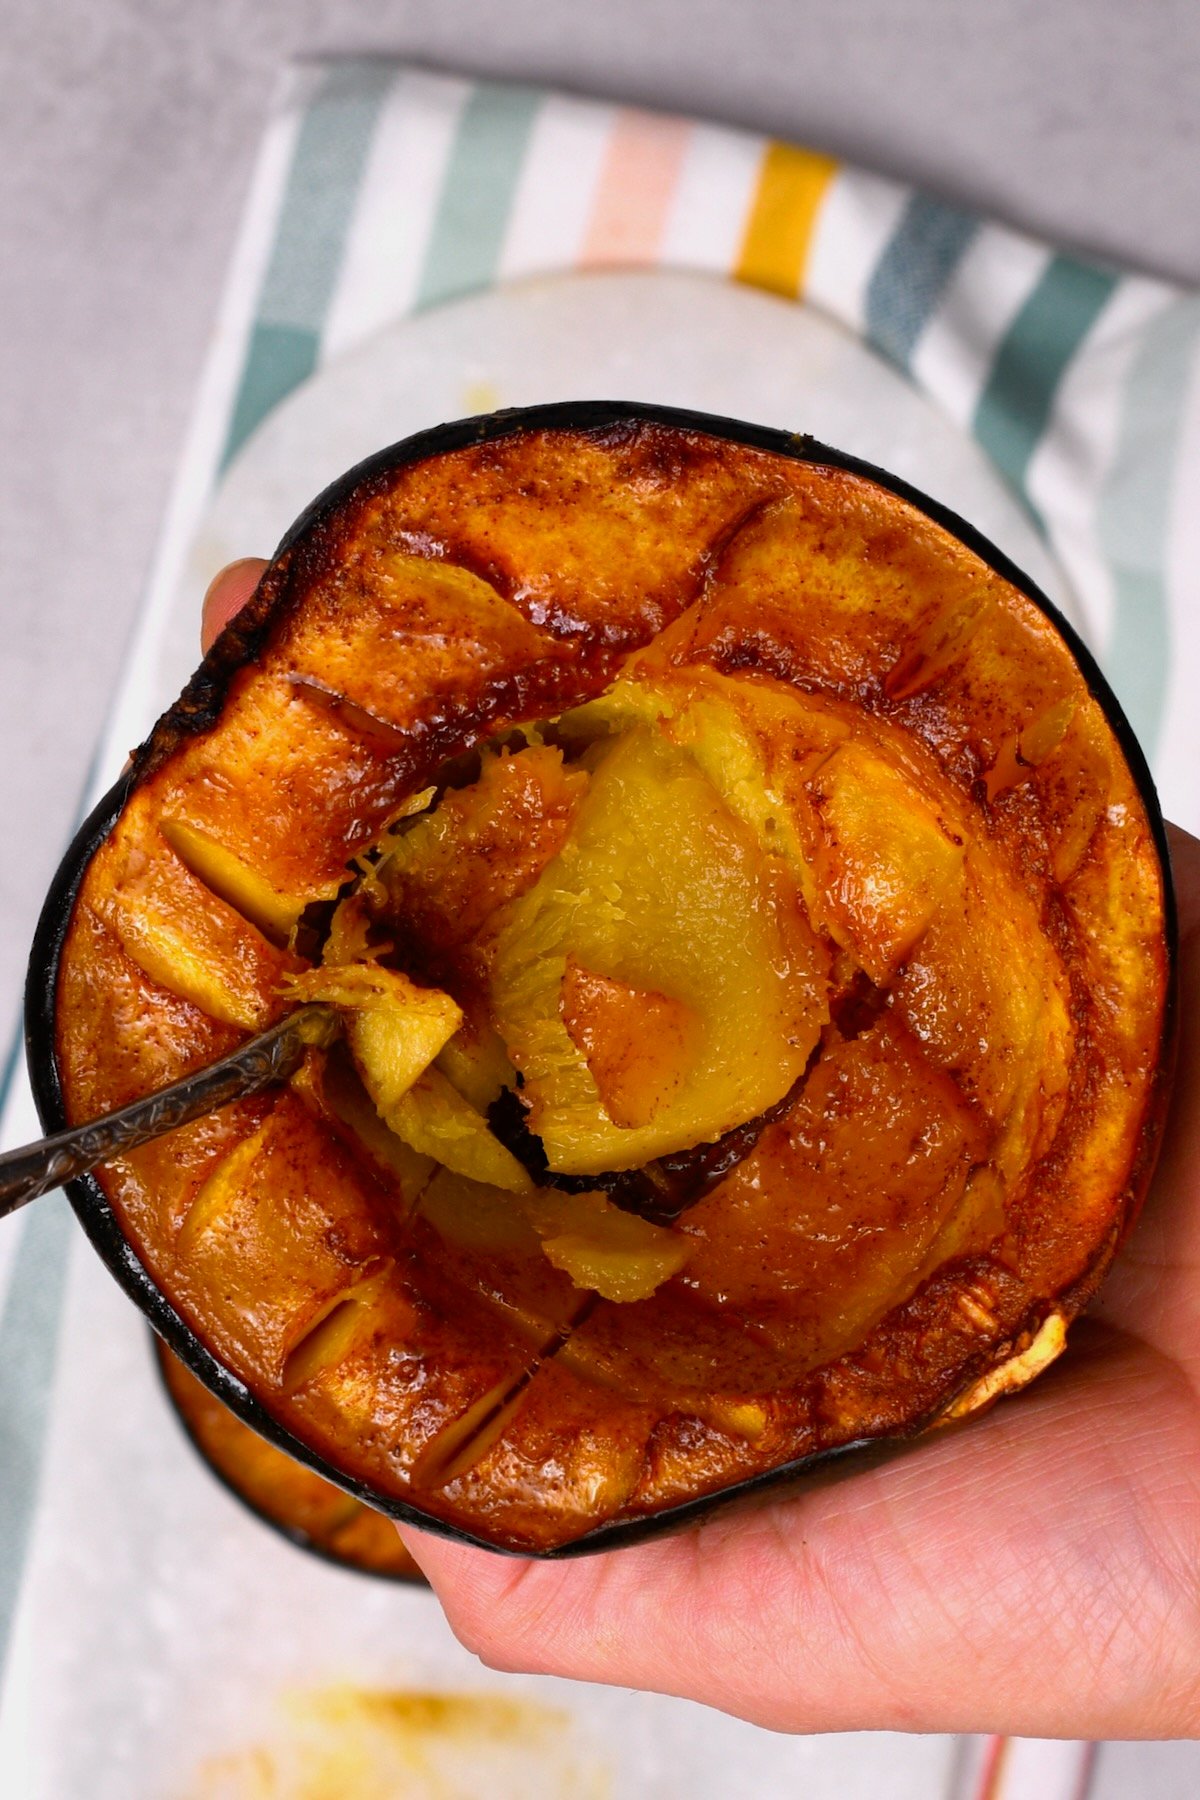 Roasted acorn squash and a spoon